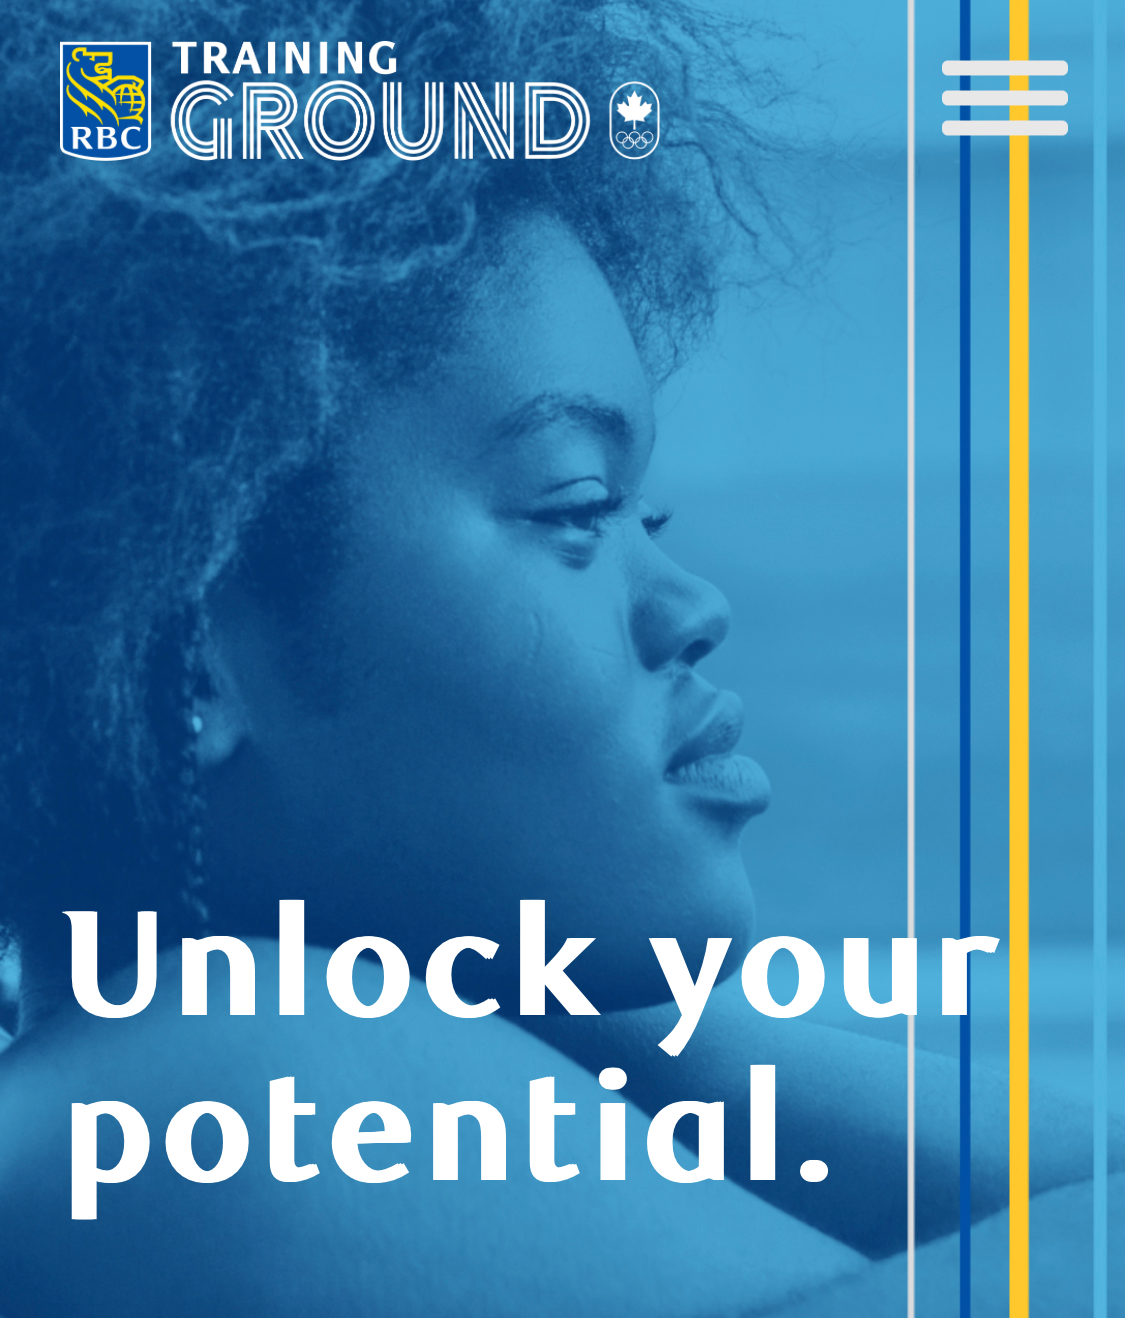 RBC Training Ground unlocks athletes potential like Eydt Wealth Partners can unlock your wealth potential.